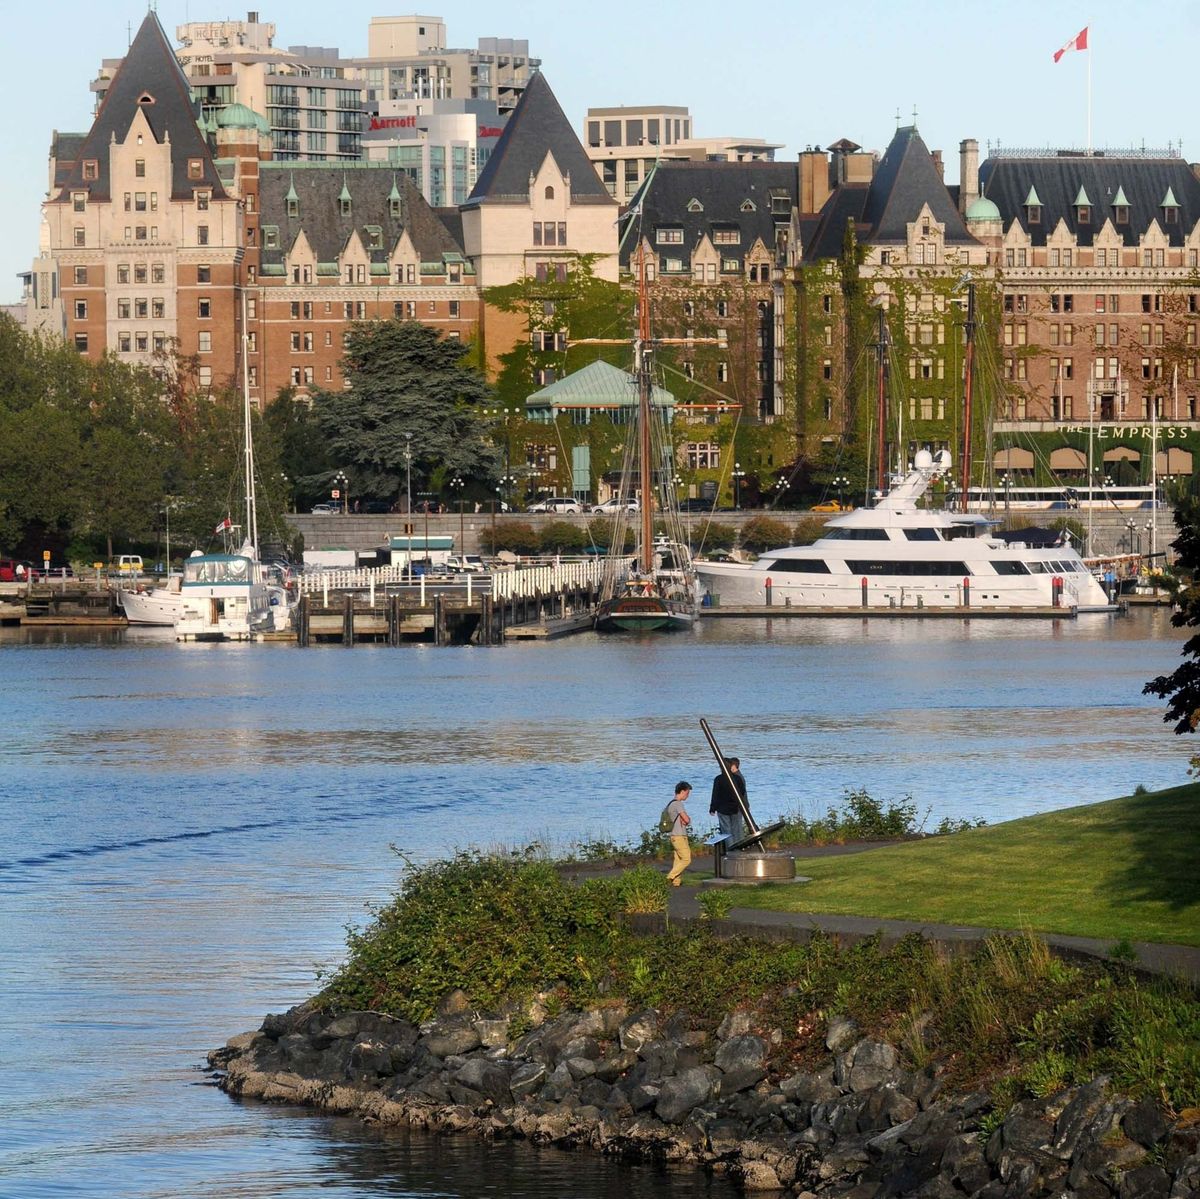 The Fairmont Empress Hotel takes the commanding position in Victoria’s Inner Harbour.